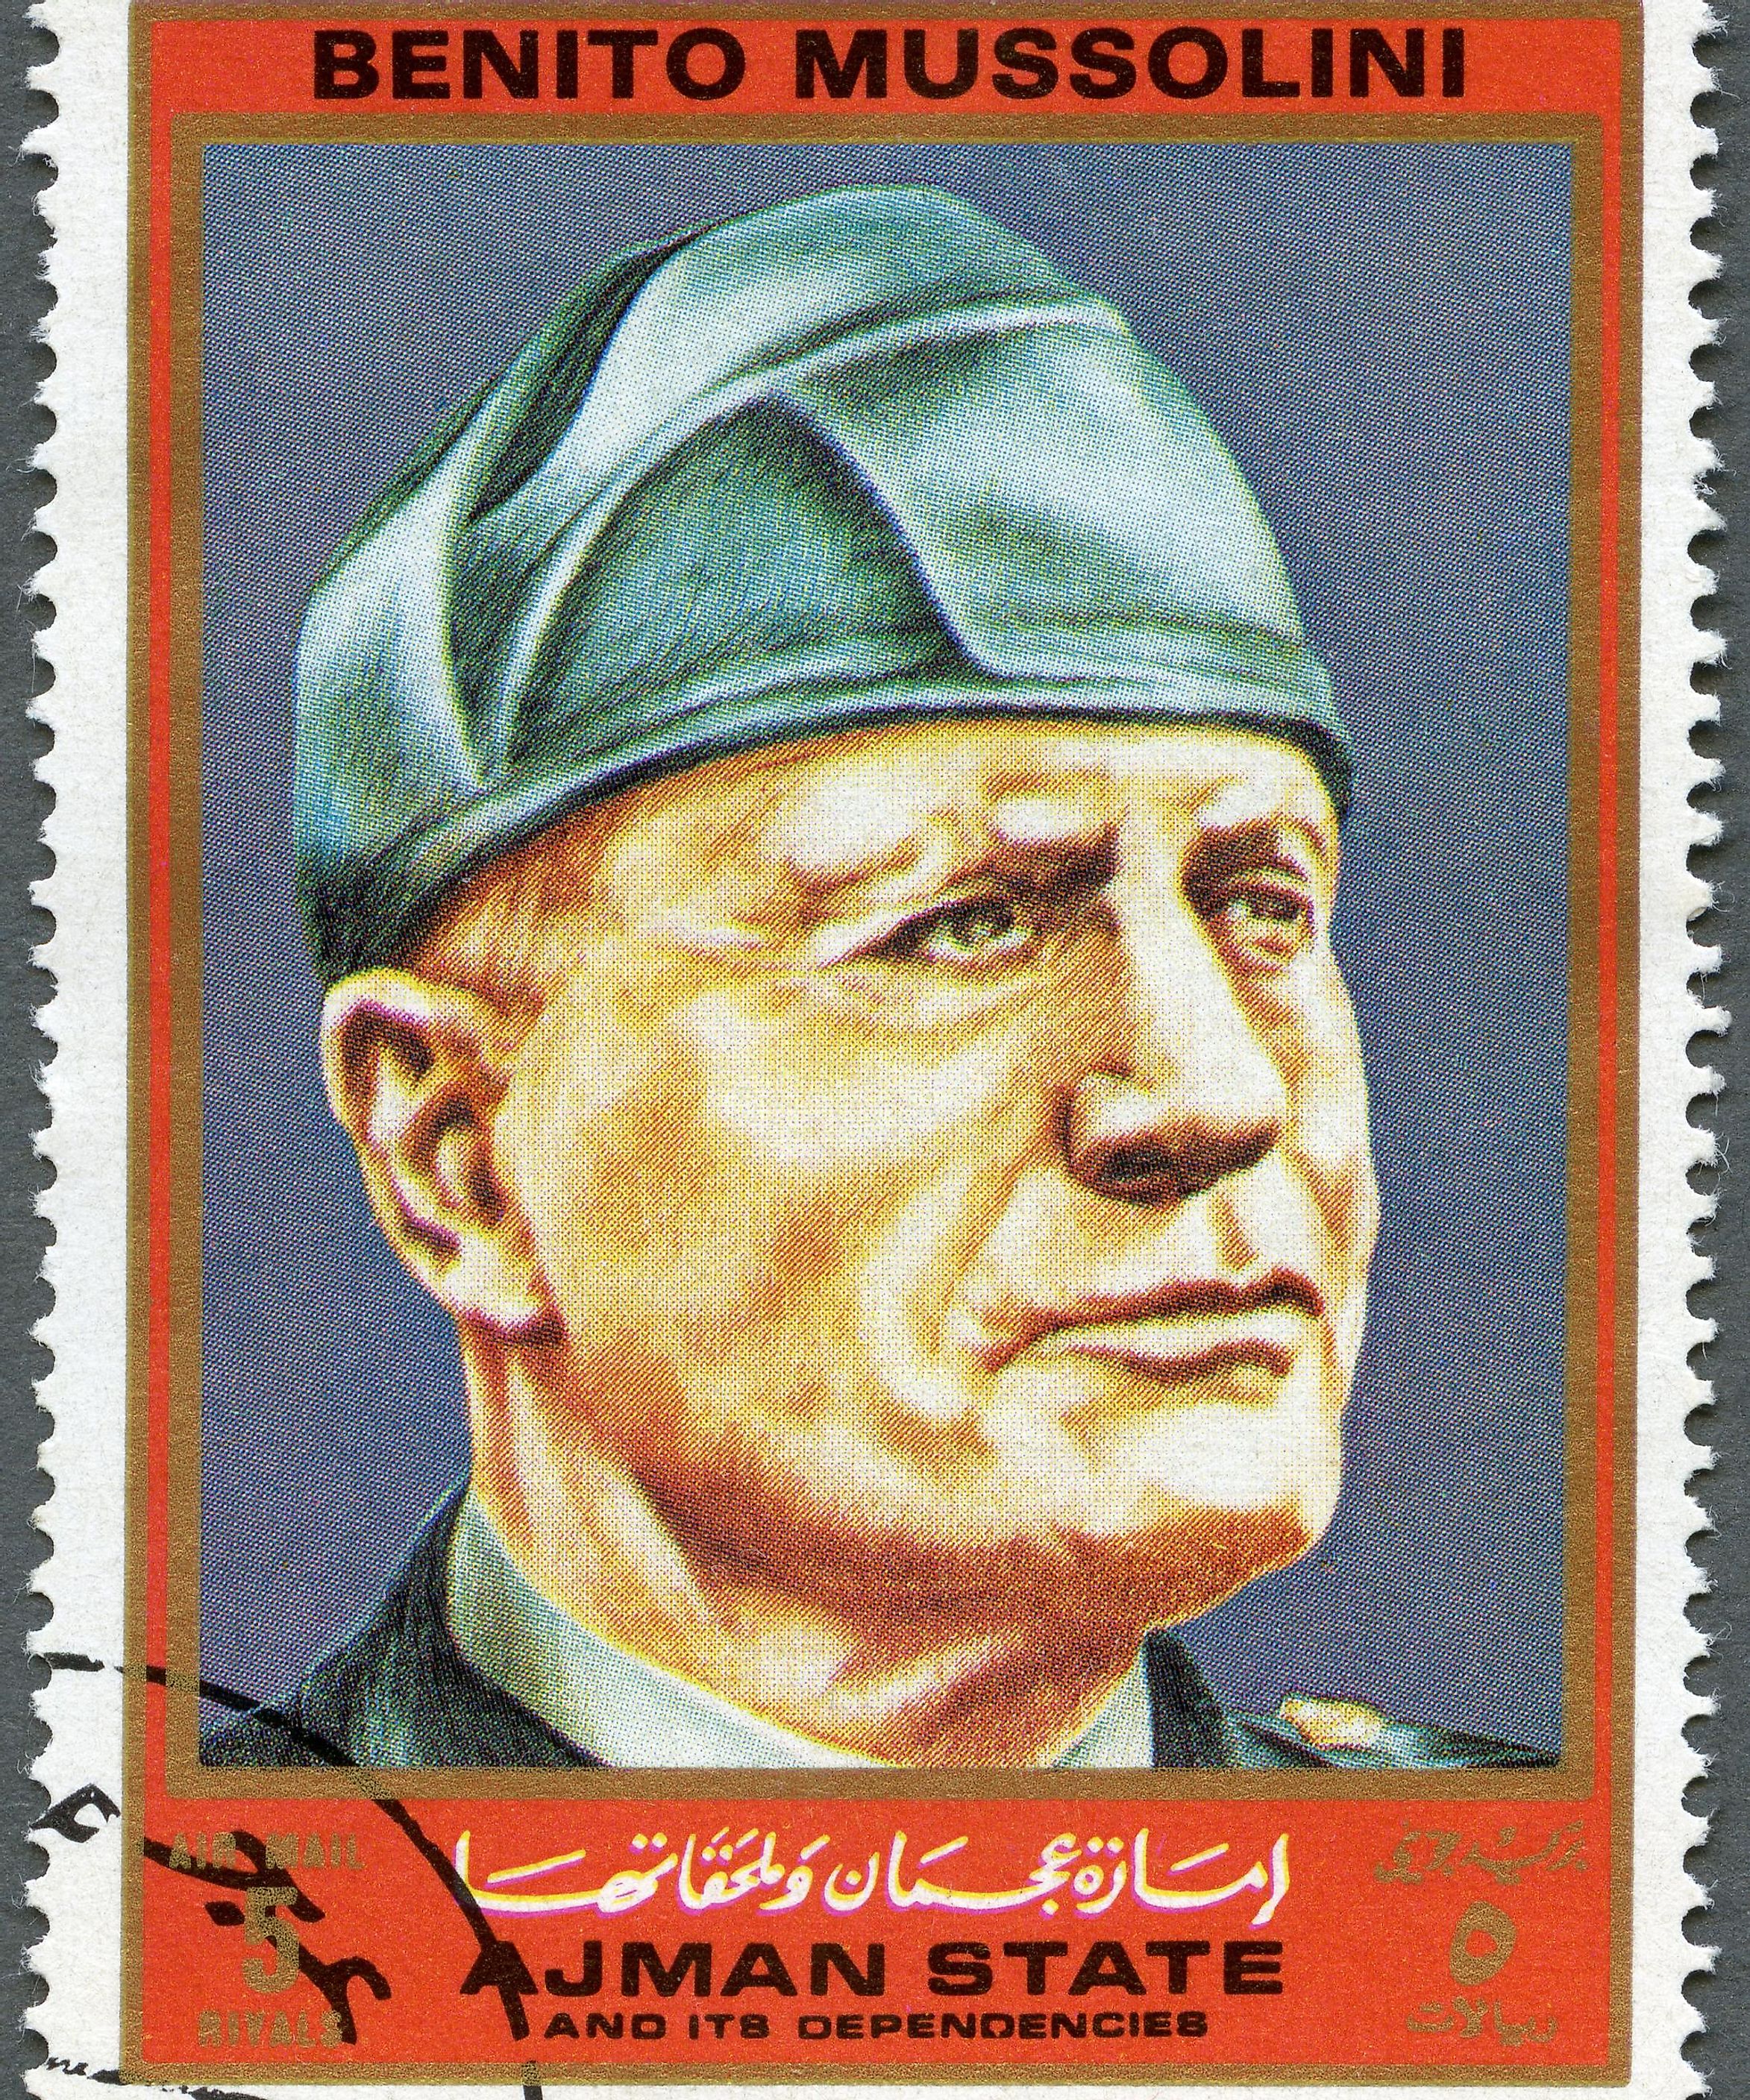 A stamp printed in Ajman shows Benito Mussolini (1883-1945), series Figures from the Second World War, circa 1972